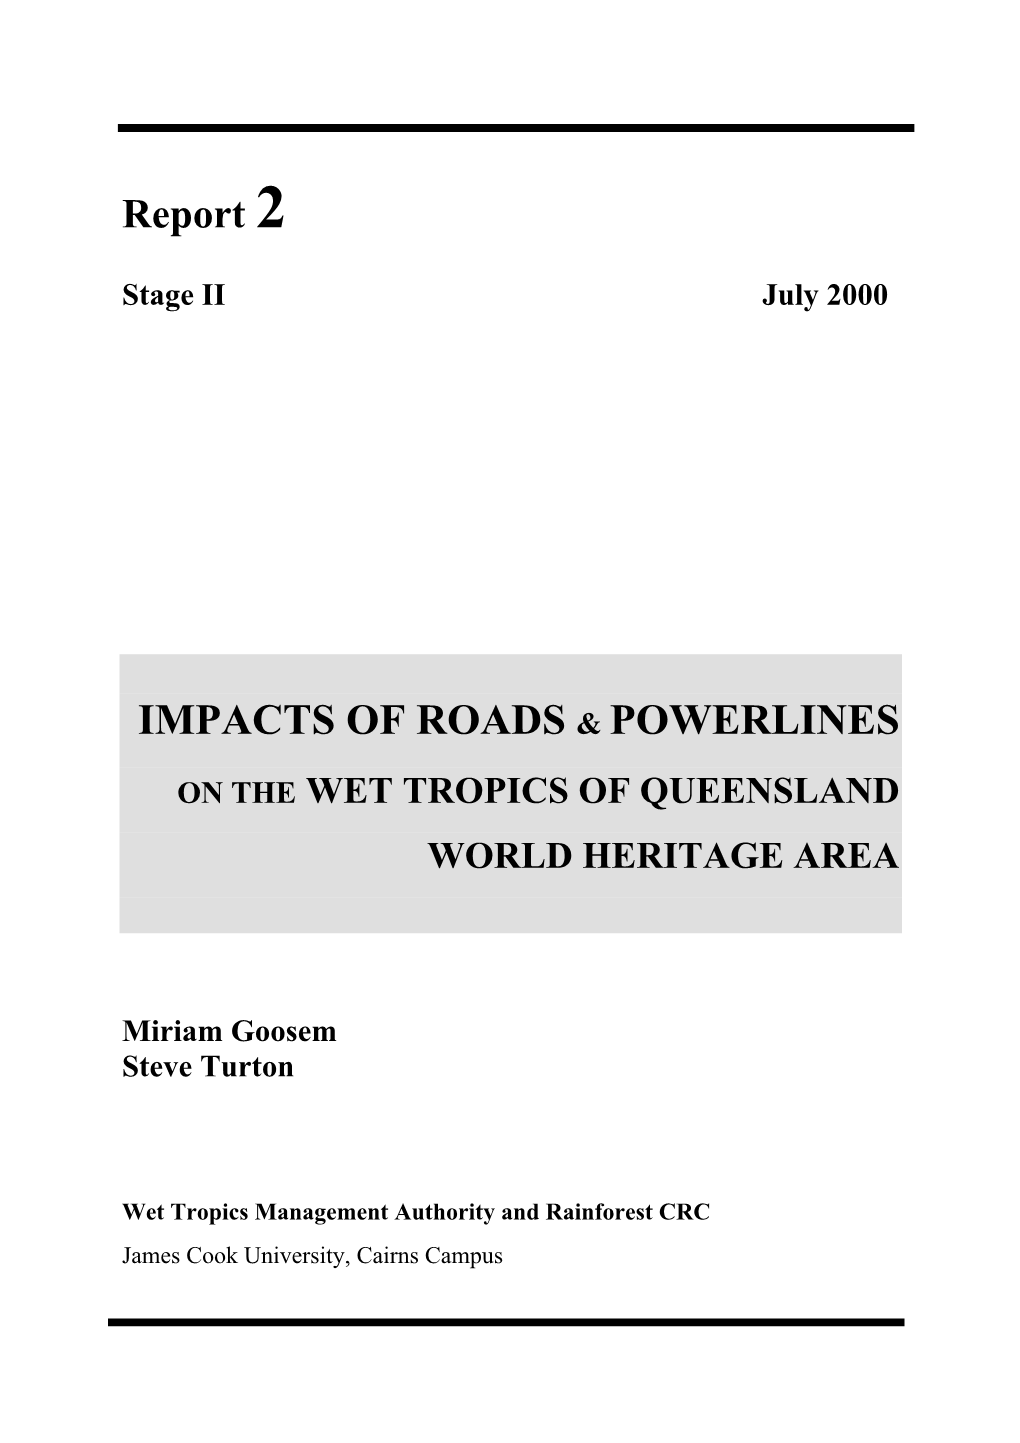 Impacts of Roads & Powerlines